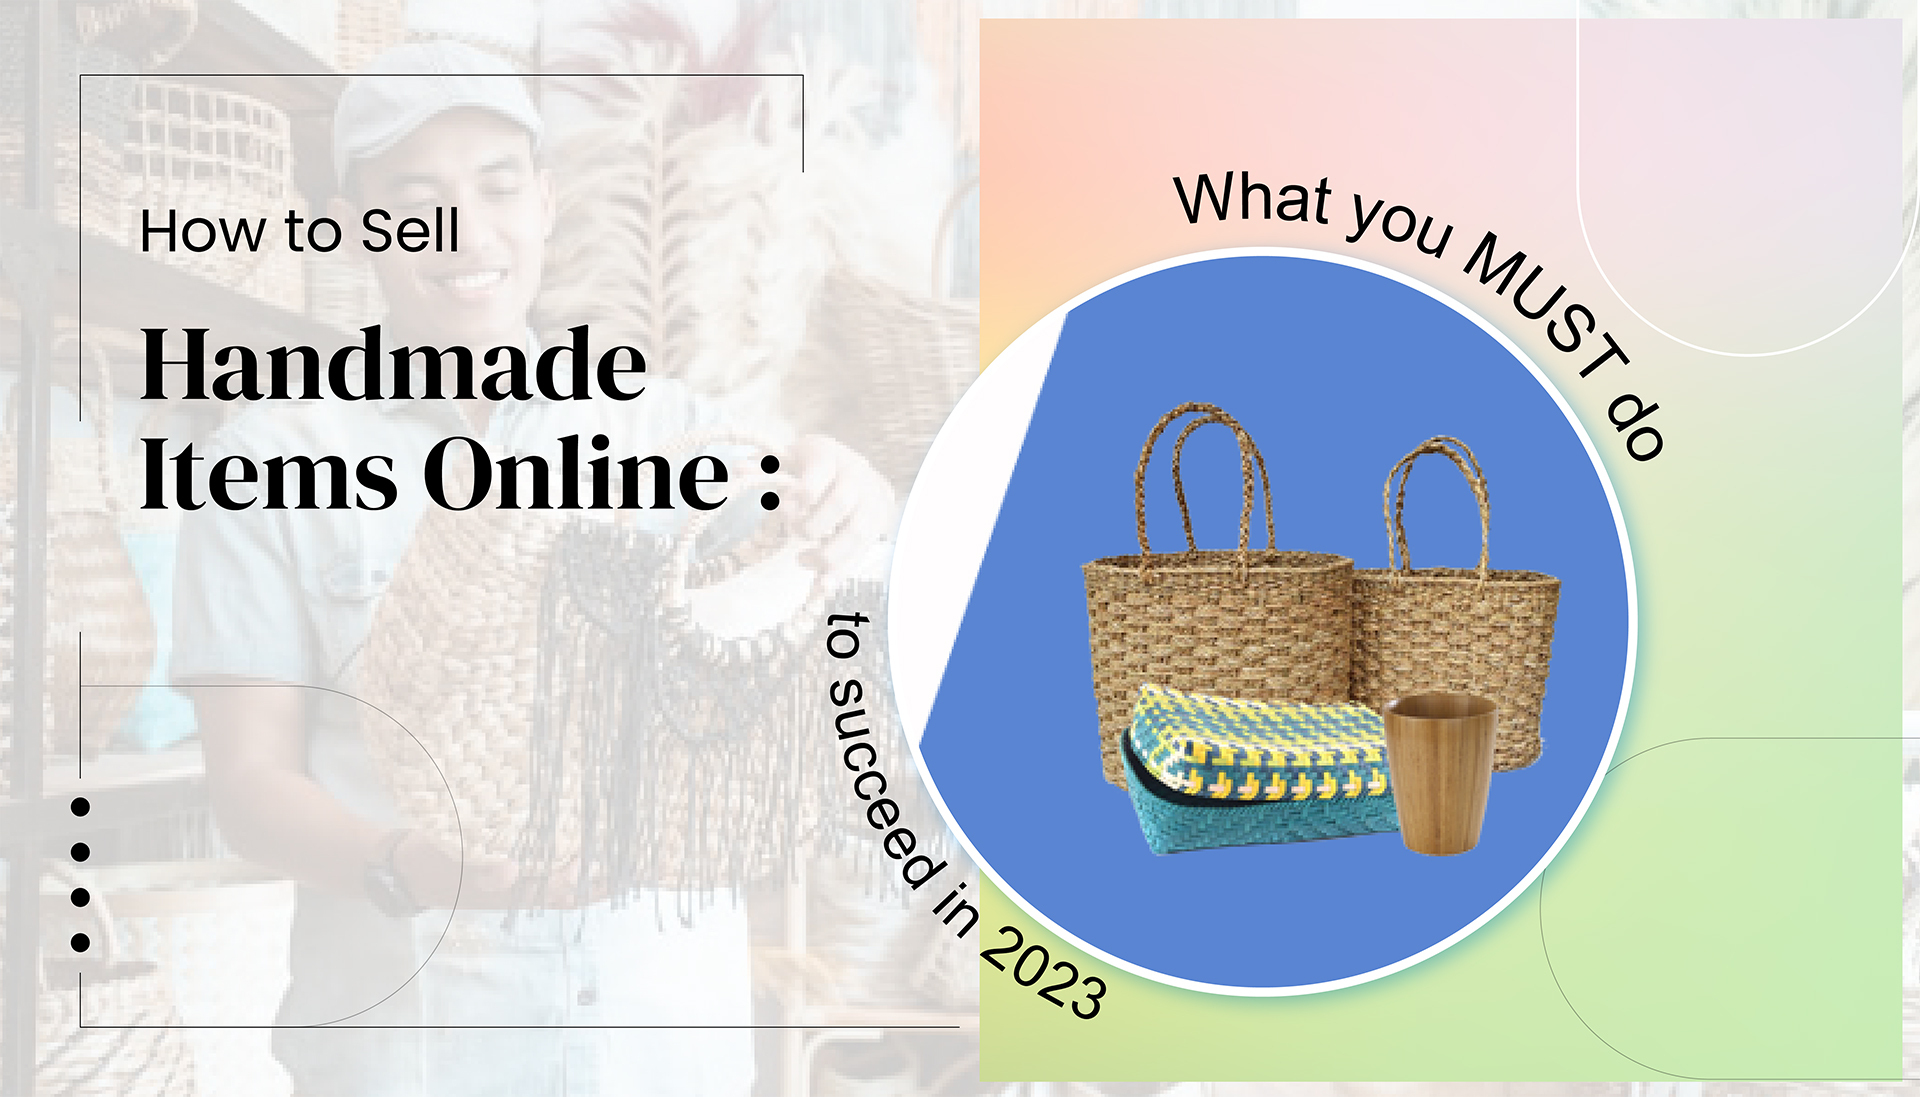 How to sell handmade items online